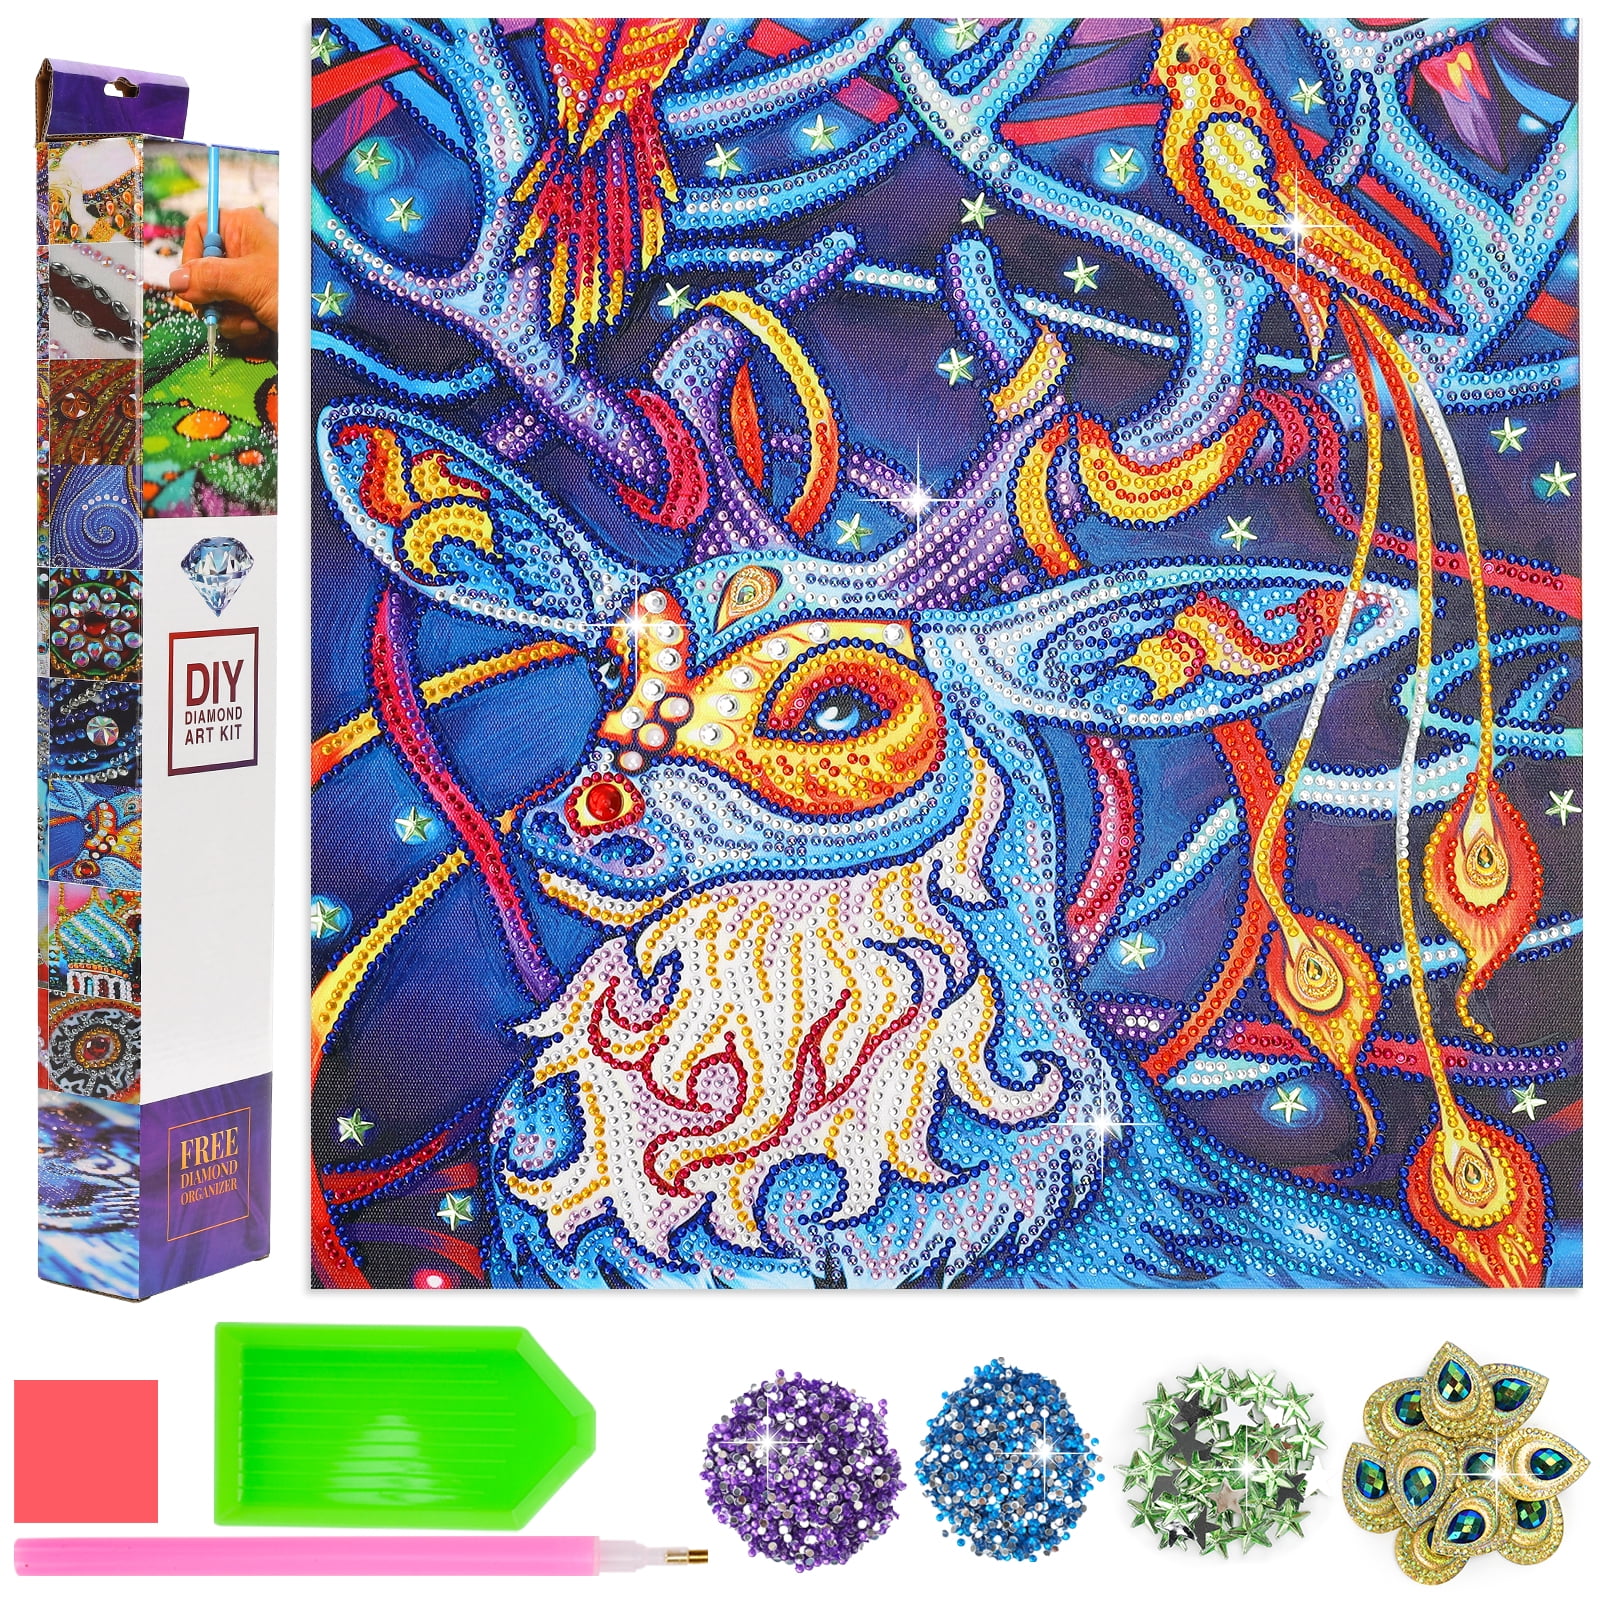 12 Pcs 5D Diamond Art Painting Stickers Kits Vedio Game Arts and Crafts for Kids Ages 6-12 Easy to DIY Creative Diamond Art for Mario Stickers Craft